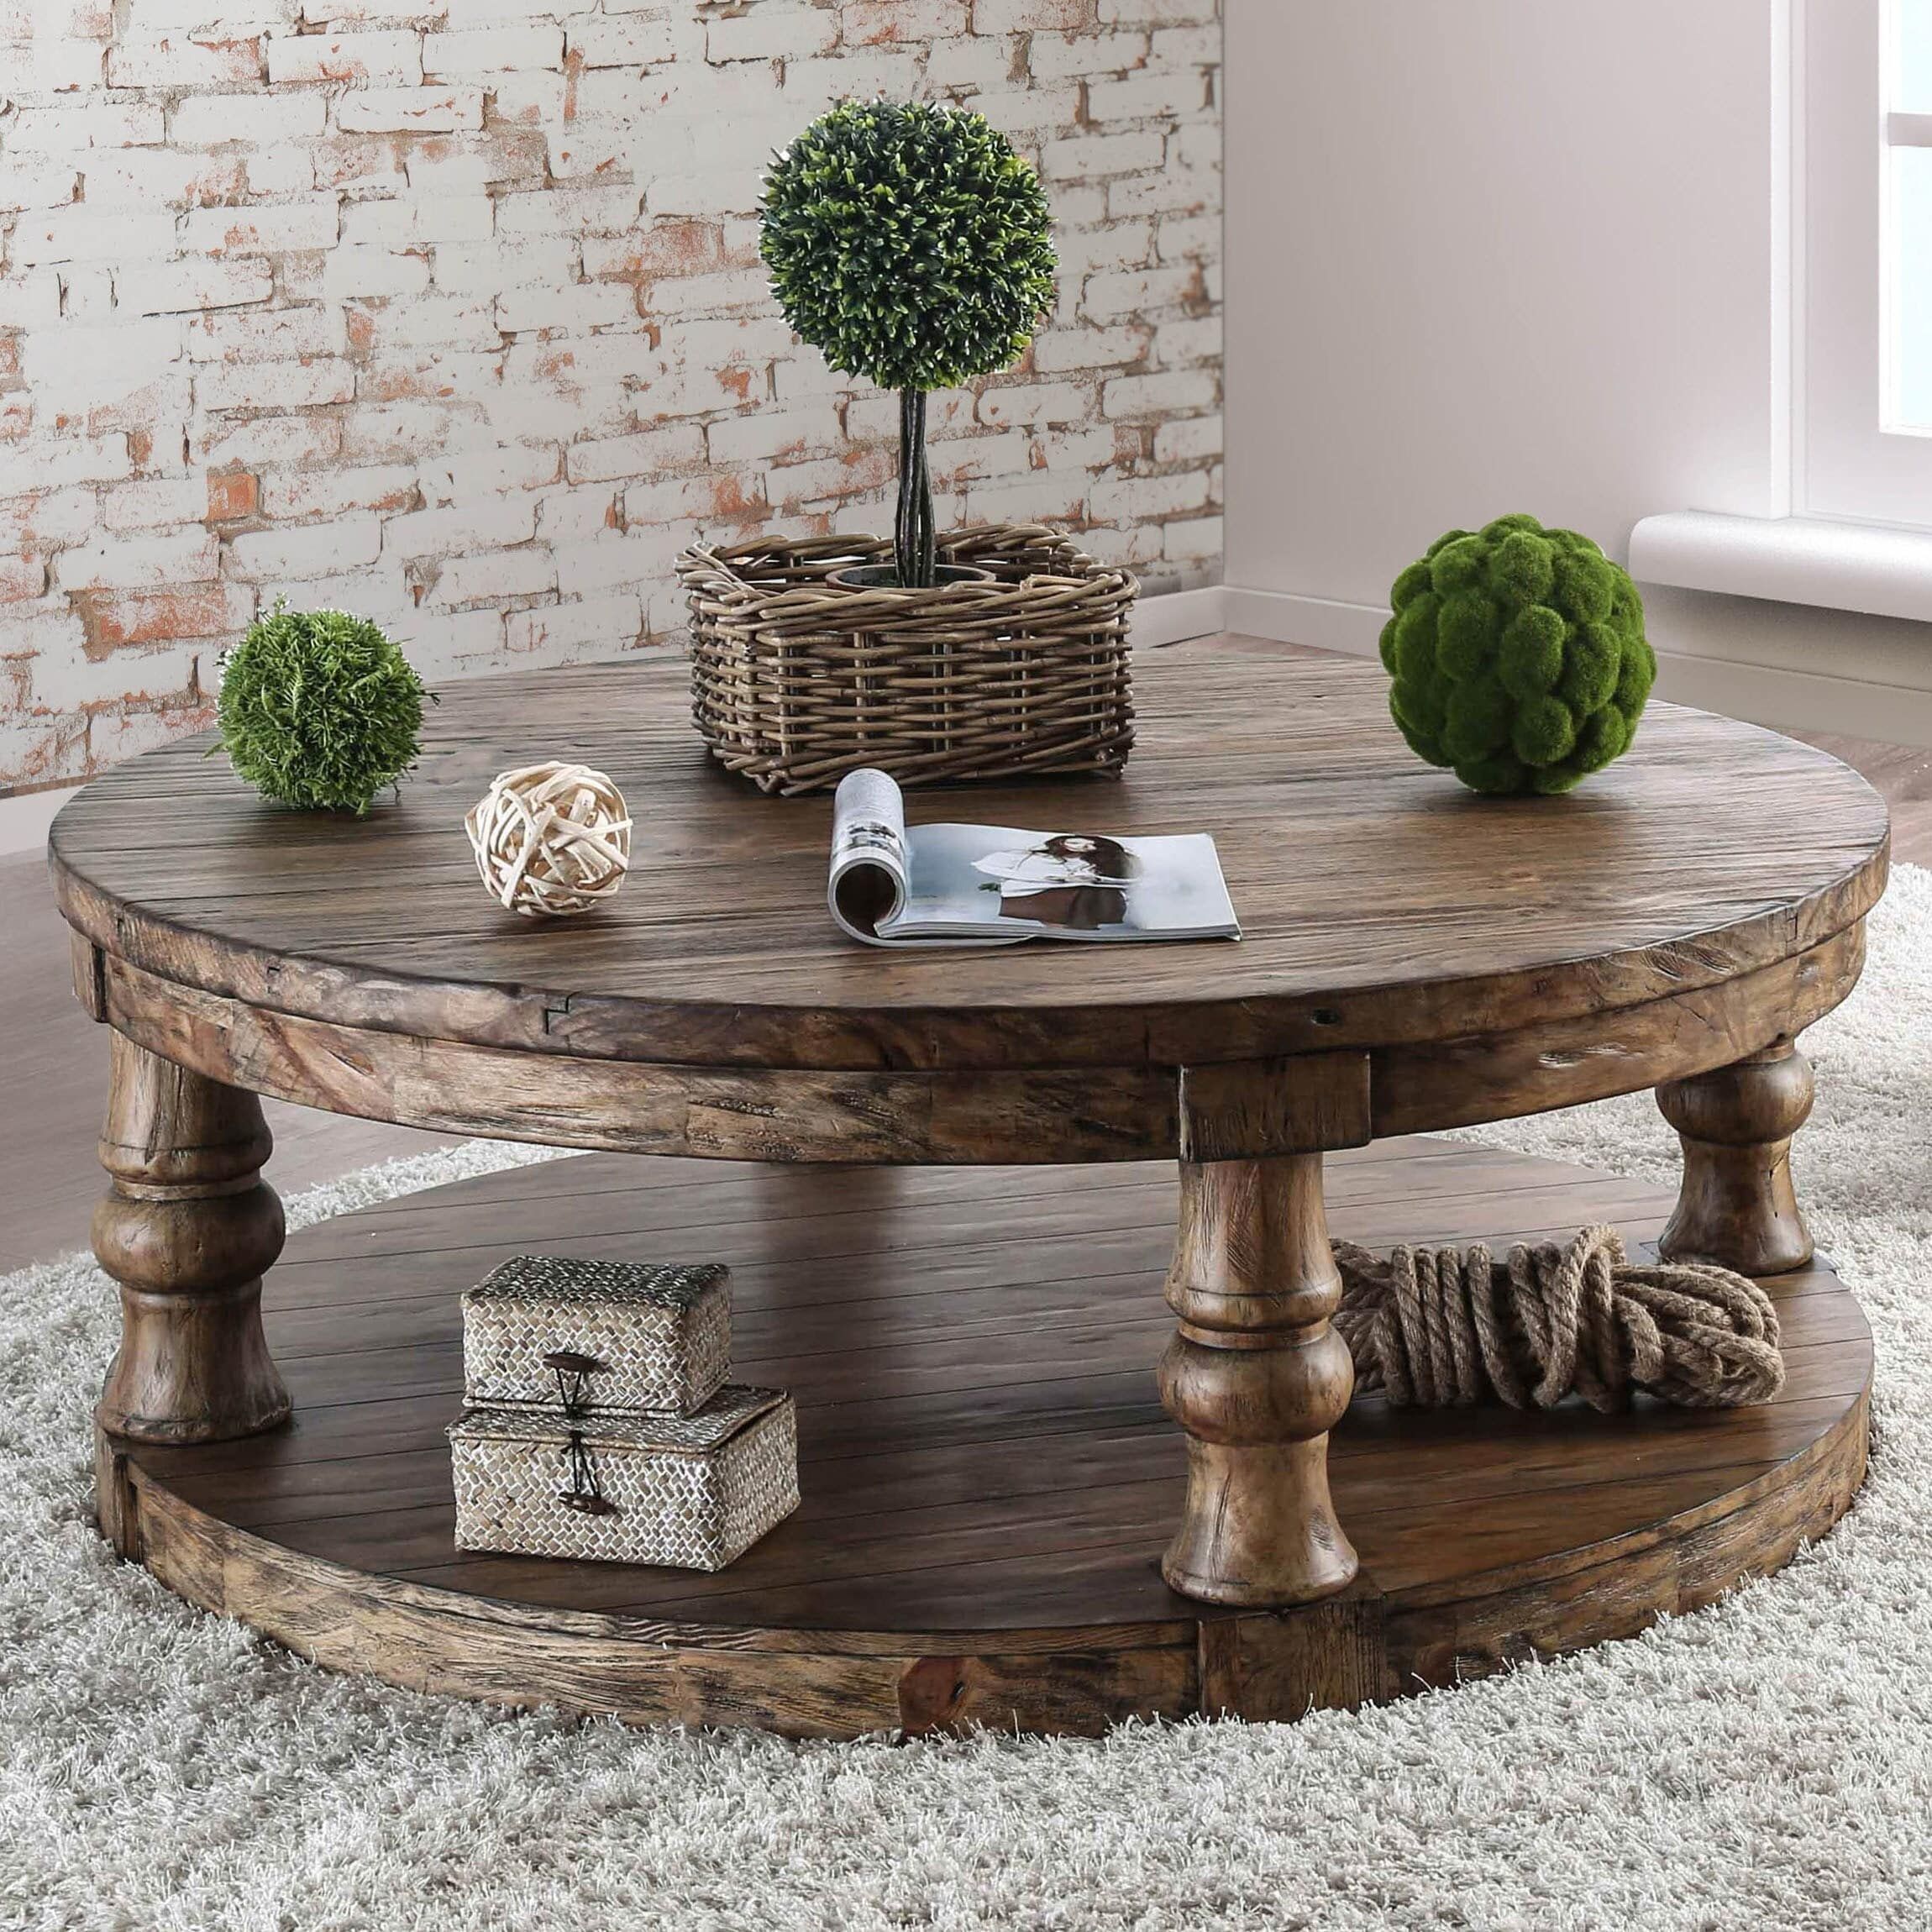 Round Rustic Coffee Table Sets – Rustic Coffee Tables That You Need To Intended For Rustic Coffee Tables (Gallery 14 of 20)